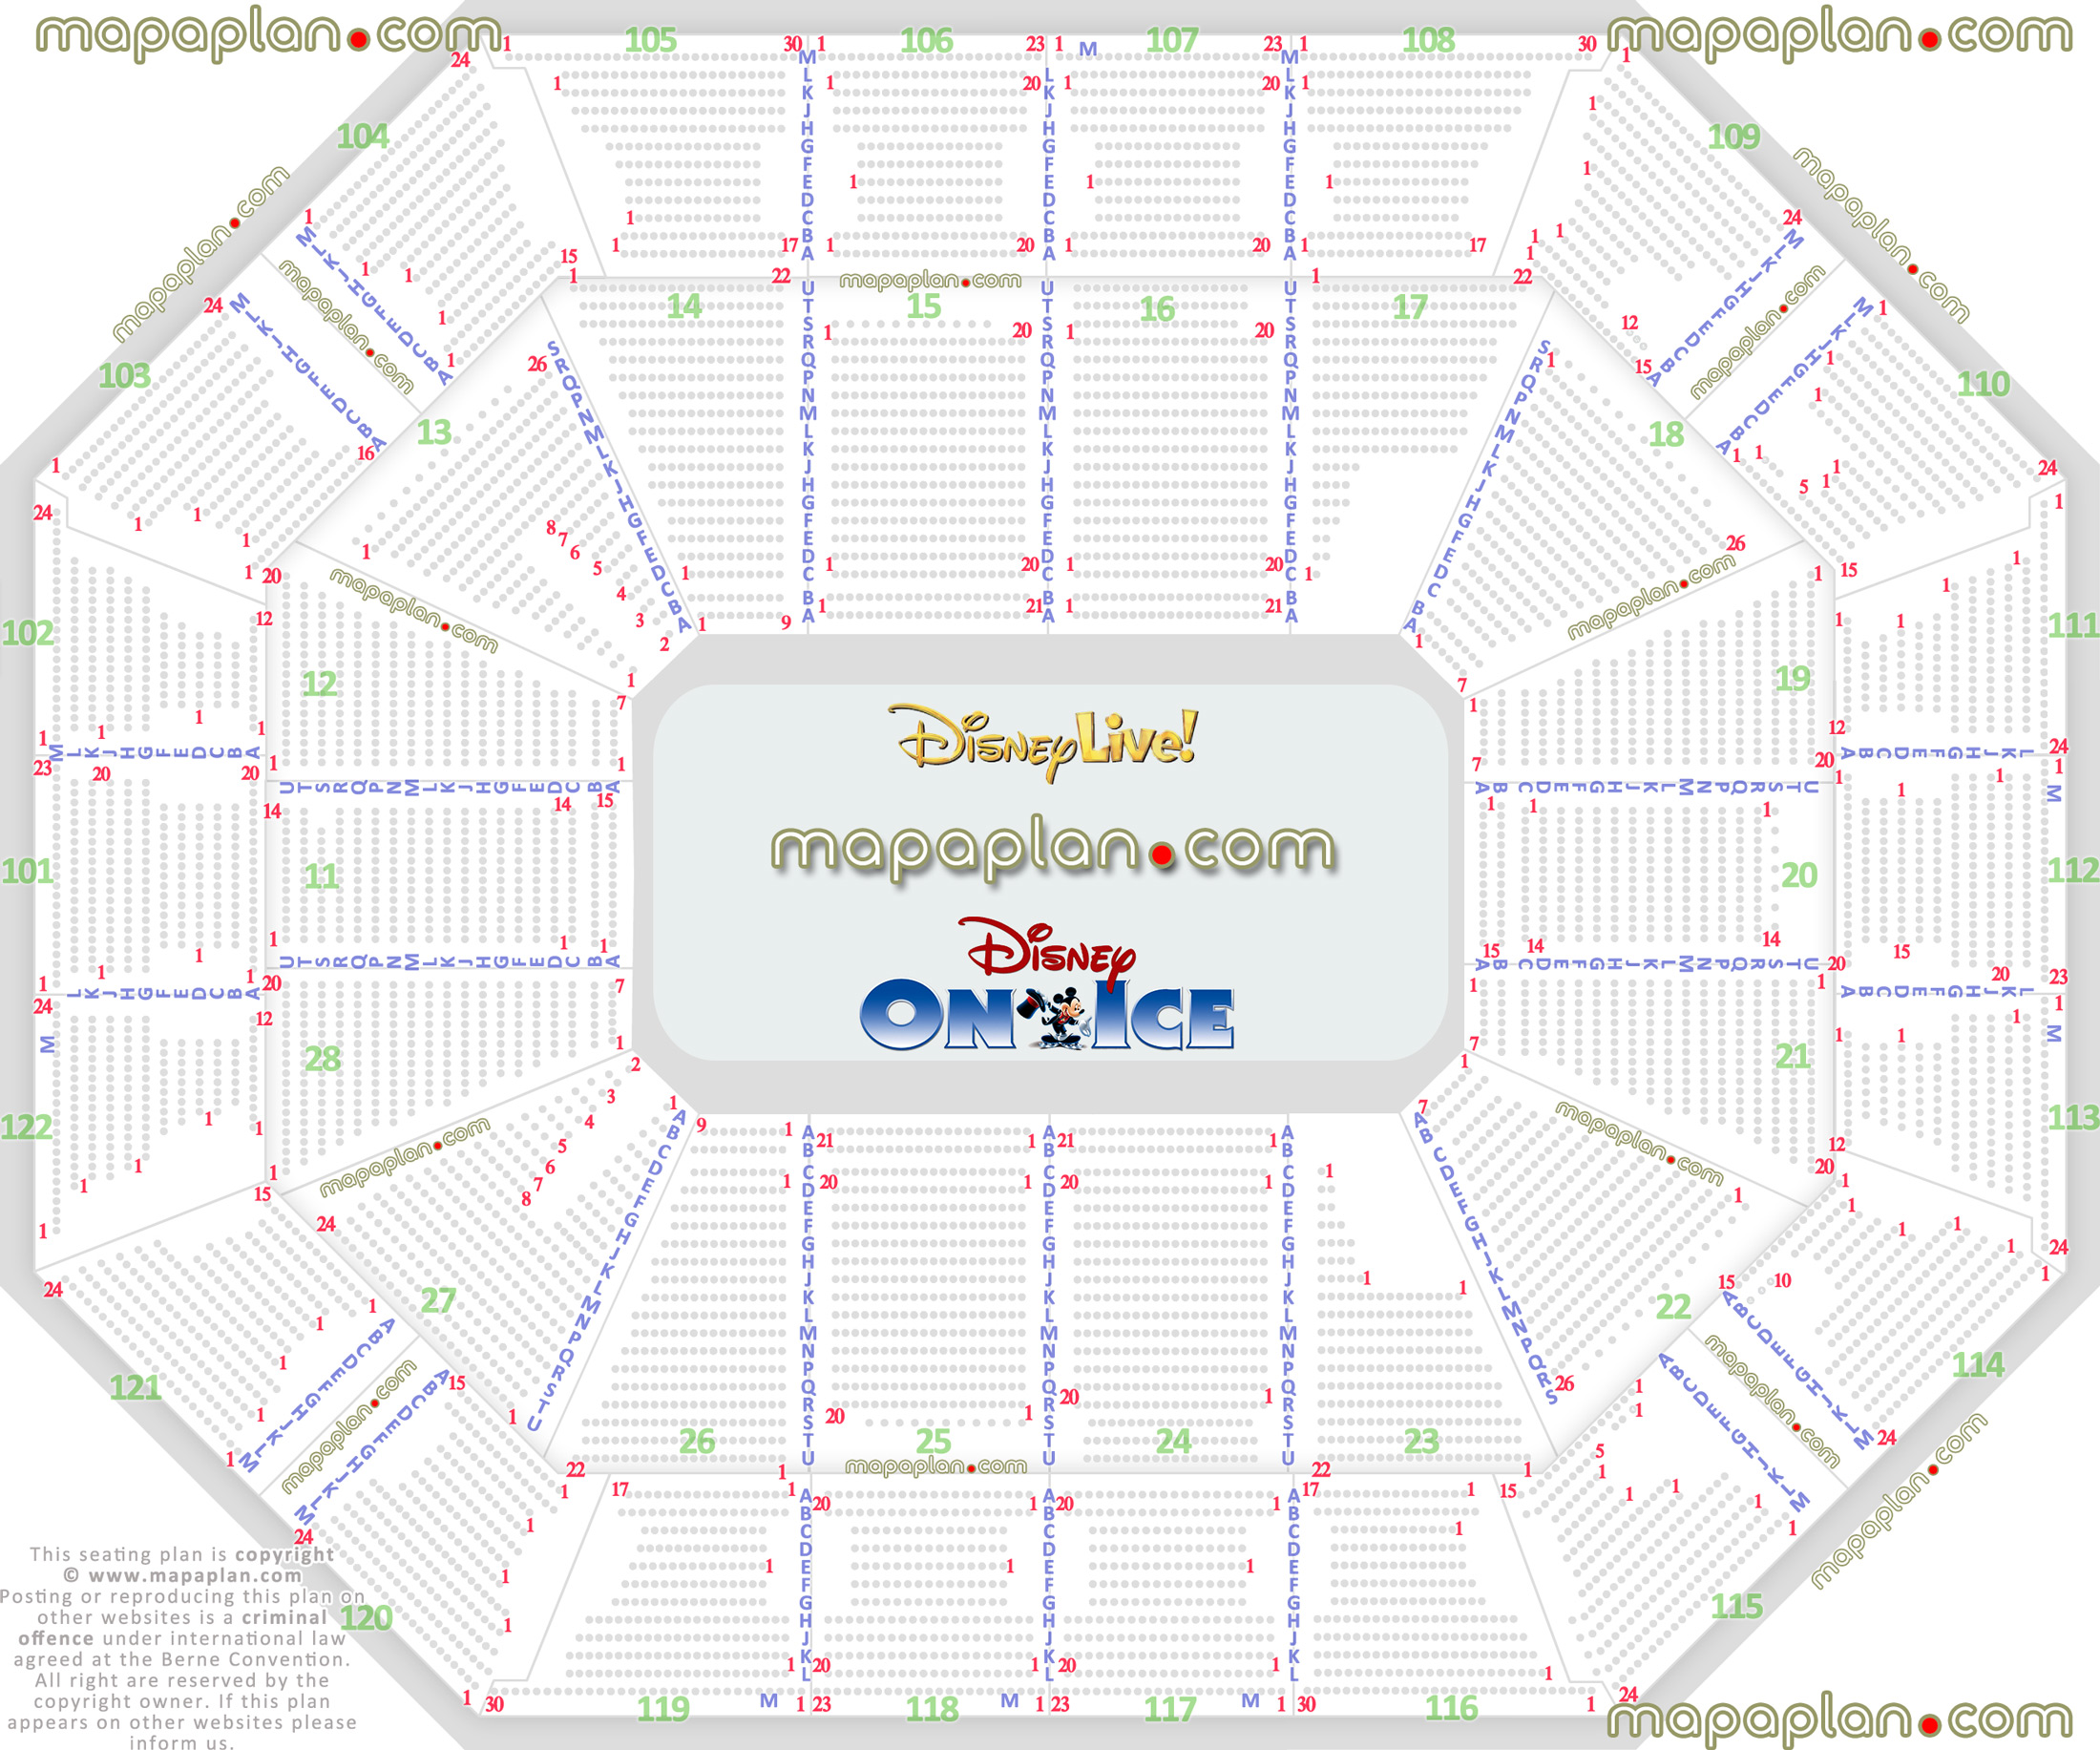 disney live disney ice best seat finder 3d tool precise detailed aisle row numbering location data plan event level lower upper balcony terrace premium box Uncasville Mohegan Sun Arena seating chart